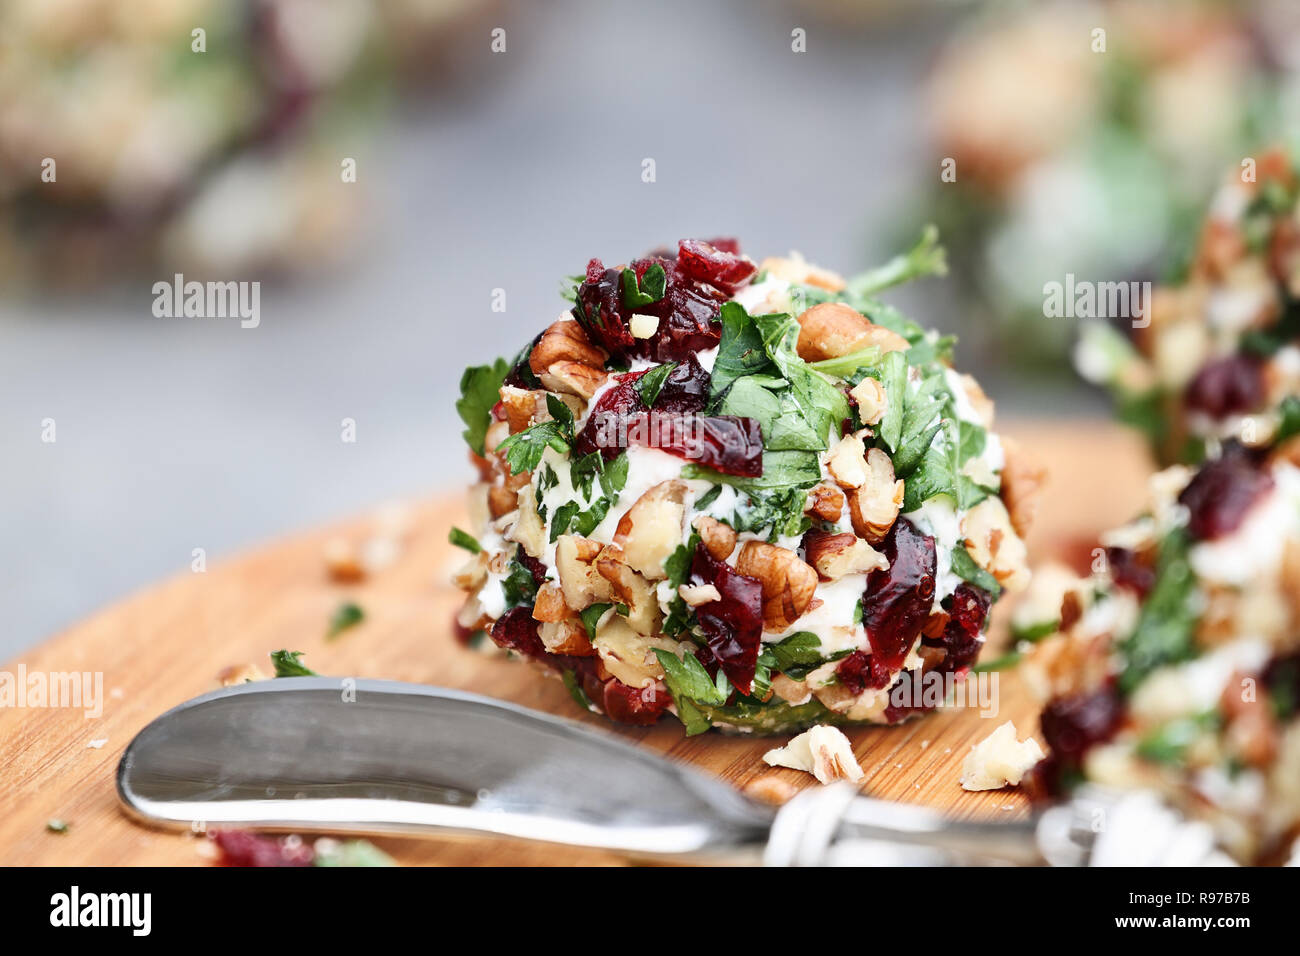 Cranberry nut cheese ball made with cream cheese, goat or feta cheese, parsley, cranberries and chopped pecans over a rustic background. Extreme shall Stock Photo